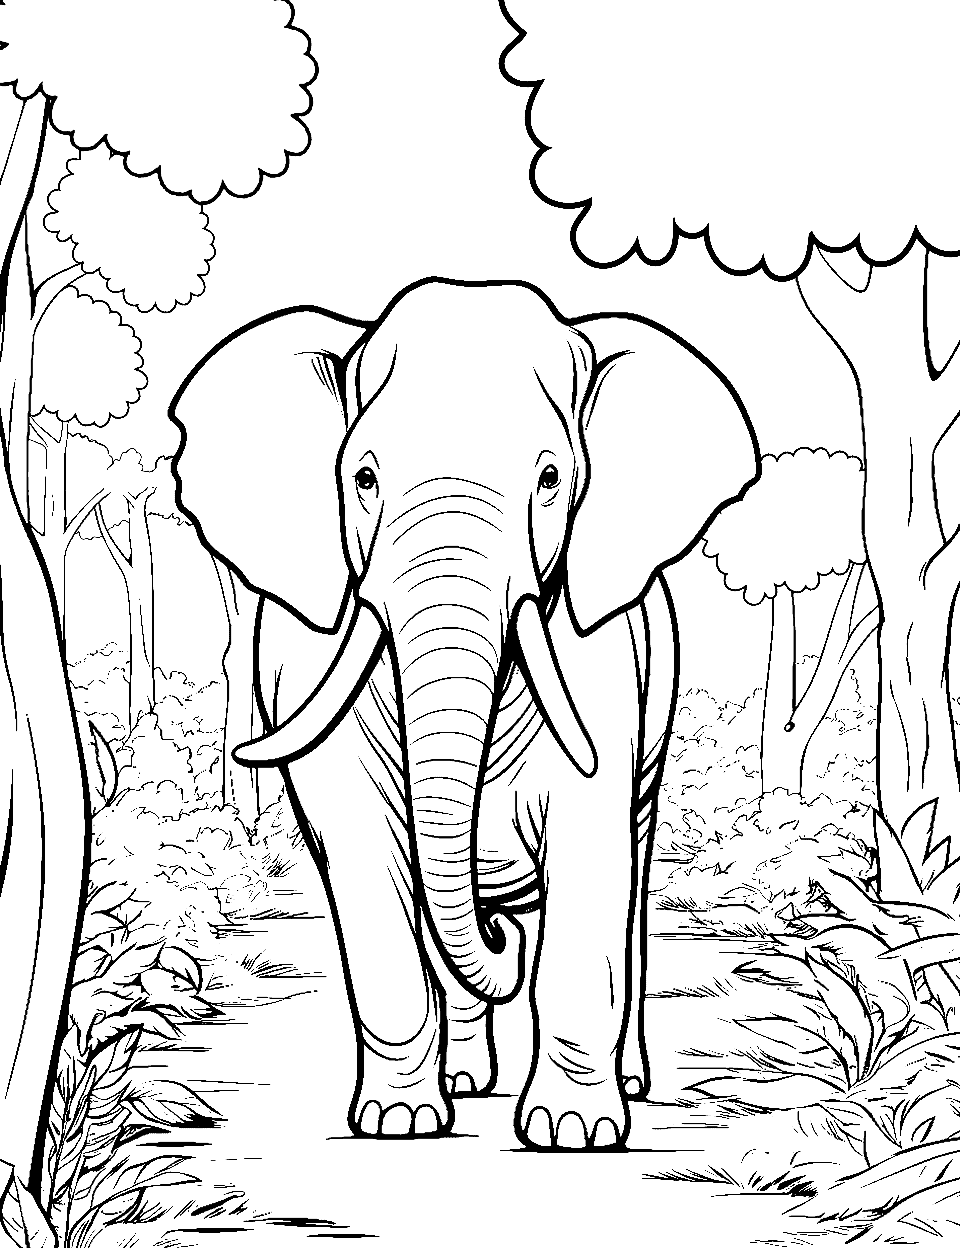 Realistic Jungle Walk Coloring Page - A detailed elephant walking through the jungle.